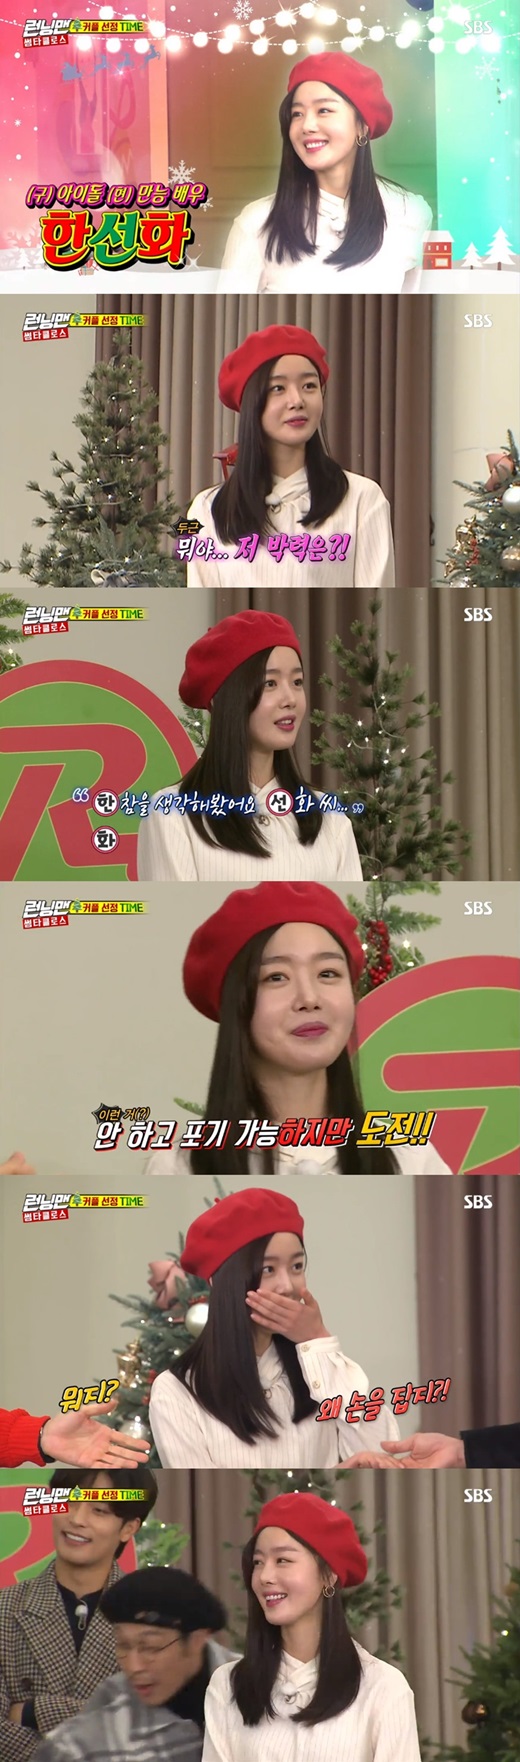 Actor Han Sun-hwa showed a unique presence in his long-time entertainment appearance.On the SBS entertainment program Running Man, which aired on the 23rd, a special feature of the Christmas celebration Thumbtan Close was featured, while Han Sun-hwa appeared as a guest.Han Sun-hwa has started to pair up as the couple chase continues.Among them, Lee Kwang-soo became a couple, but eventually he gave Park Ha-na a pair again and was confused from his first appearance.Han Sun-hwa is a guest, but he has a charm-blowing time as a guest, choosing Lee Kwang-soo as a partner Park Ha-na wants to join.It was a sudden situation, but I challenged Lee Kwang-soos name Three-Line Poem to catch Lee Kwang-soos heart.Han Sun-hwa, who confidently continued Three-Line Poem, was grinned in the last letter and laughed at MC Yoo Jae-Suk for his shot.Therefore, Han Sun-hwa, who became a soloist, started to make a pair again, and showed a unique sense of entertainment by showing his ability to ask for a new partner, Three-Line Poem, who was hit by Yoo Jae-Suk among the remaining partners.Han Sun-hwa, who has left an intense impact since the beginning of his performance in the entertainment industry for a long time, is expected to show his performance in the couple race next week.Meanwhile, Han Sun-hwa will visit the CRT with TVN single-act drama Drama Stage 2019 - Good - My Life Insurance, which will be broadcast at 12 pm on the 29th.